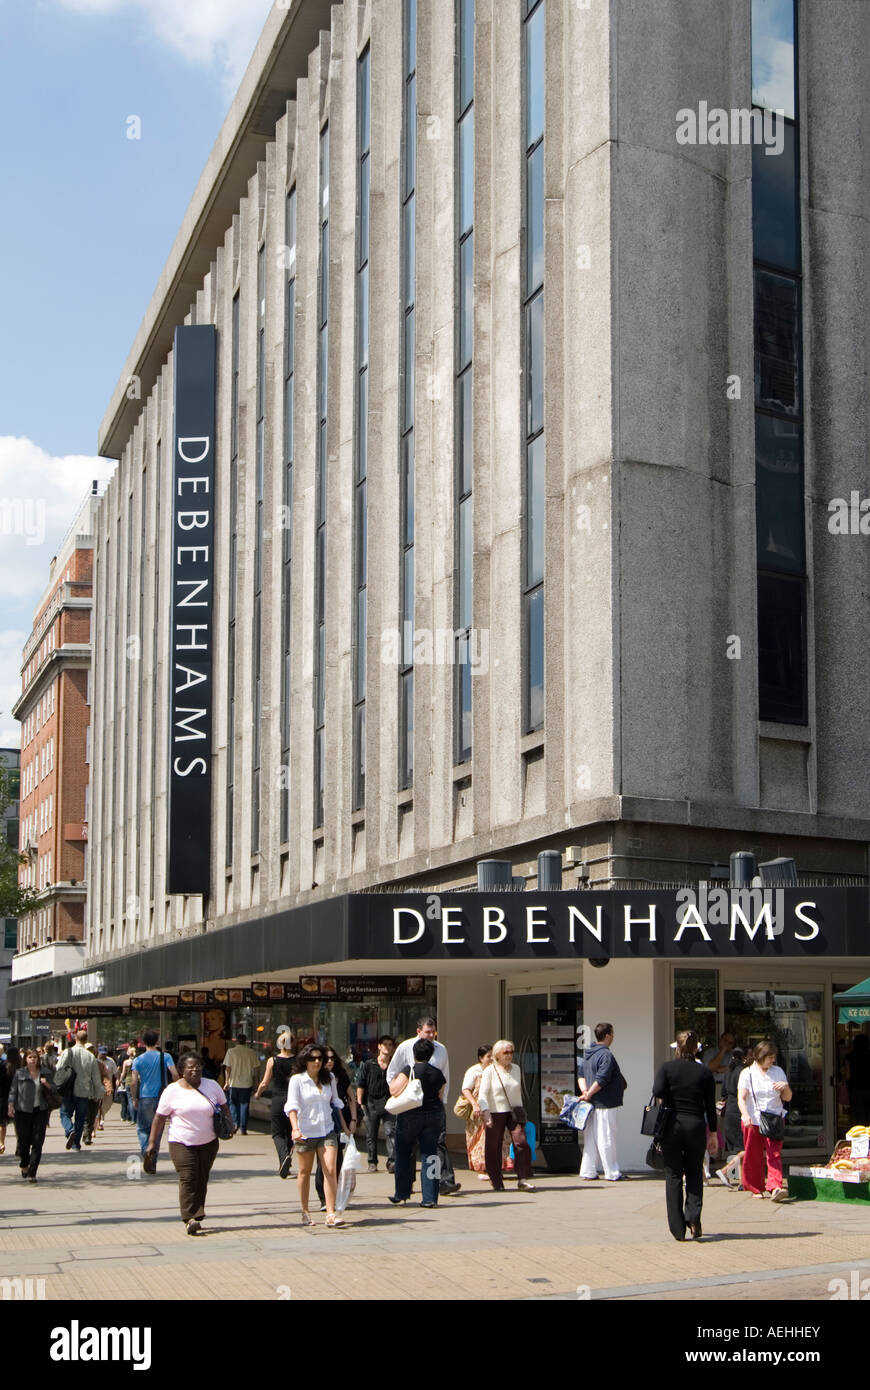 Debenhams Department Store Sign On Oxford Street In Central London Uk Stock Photo Alamy